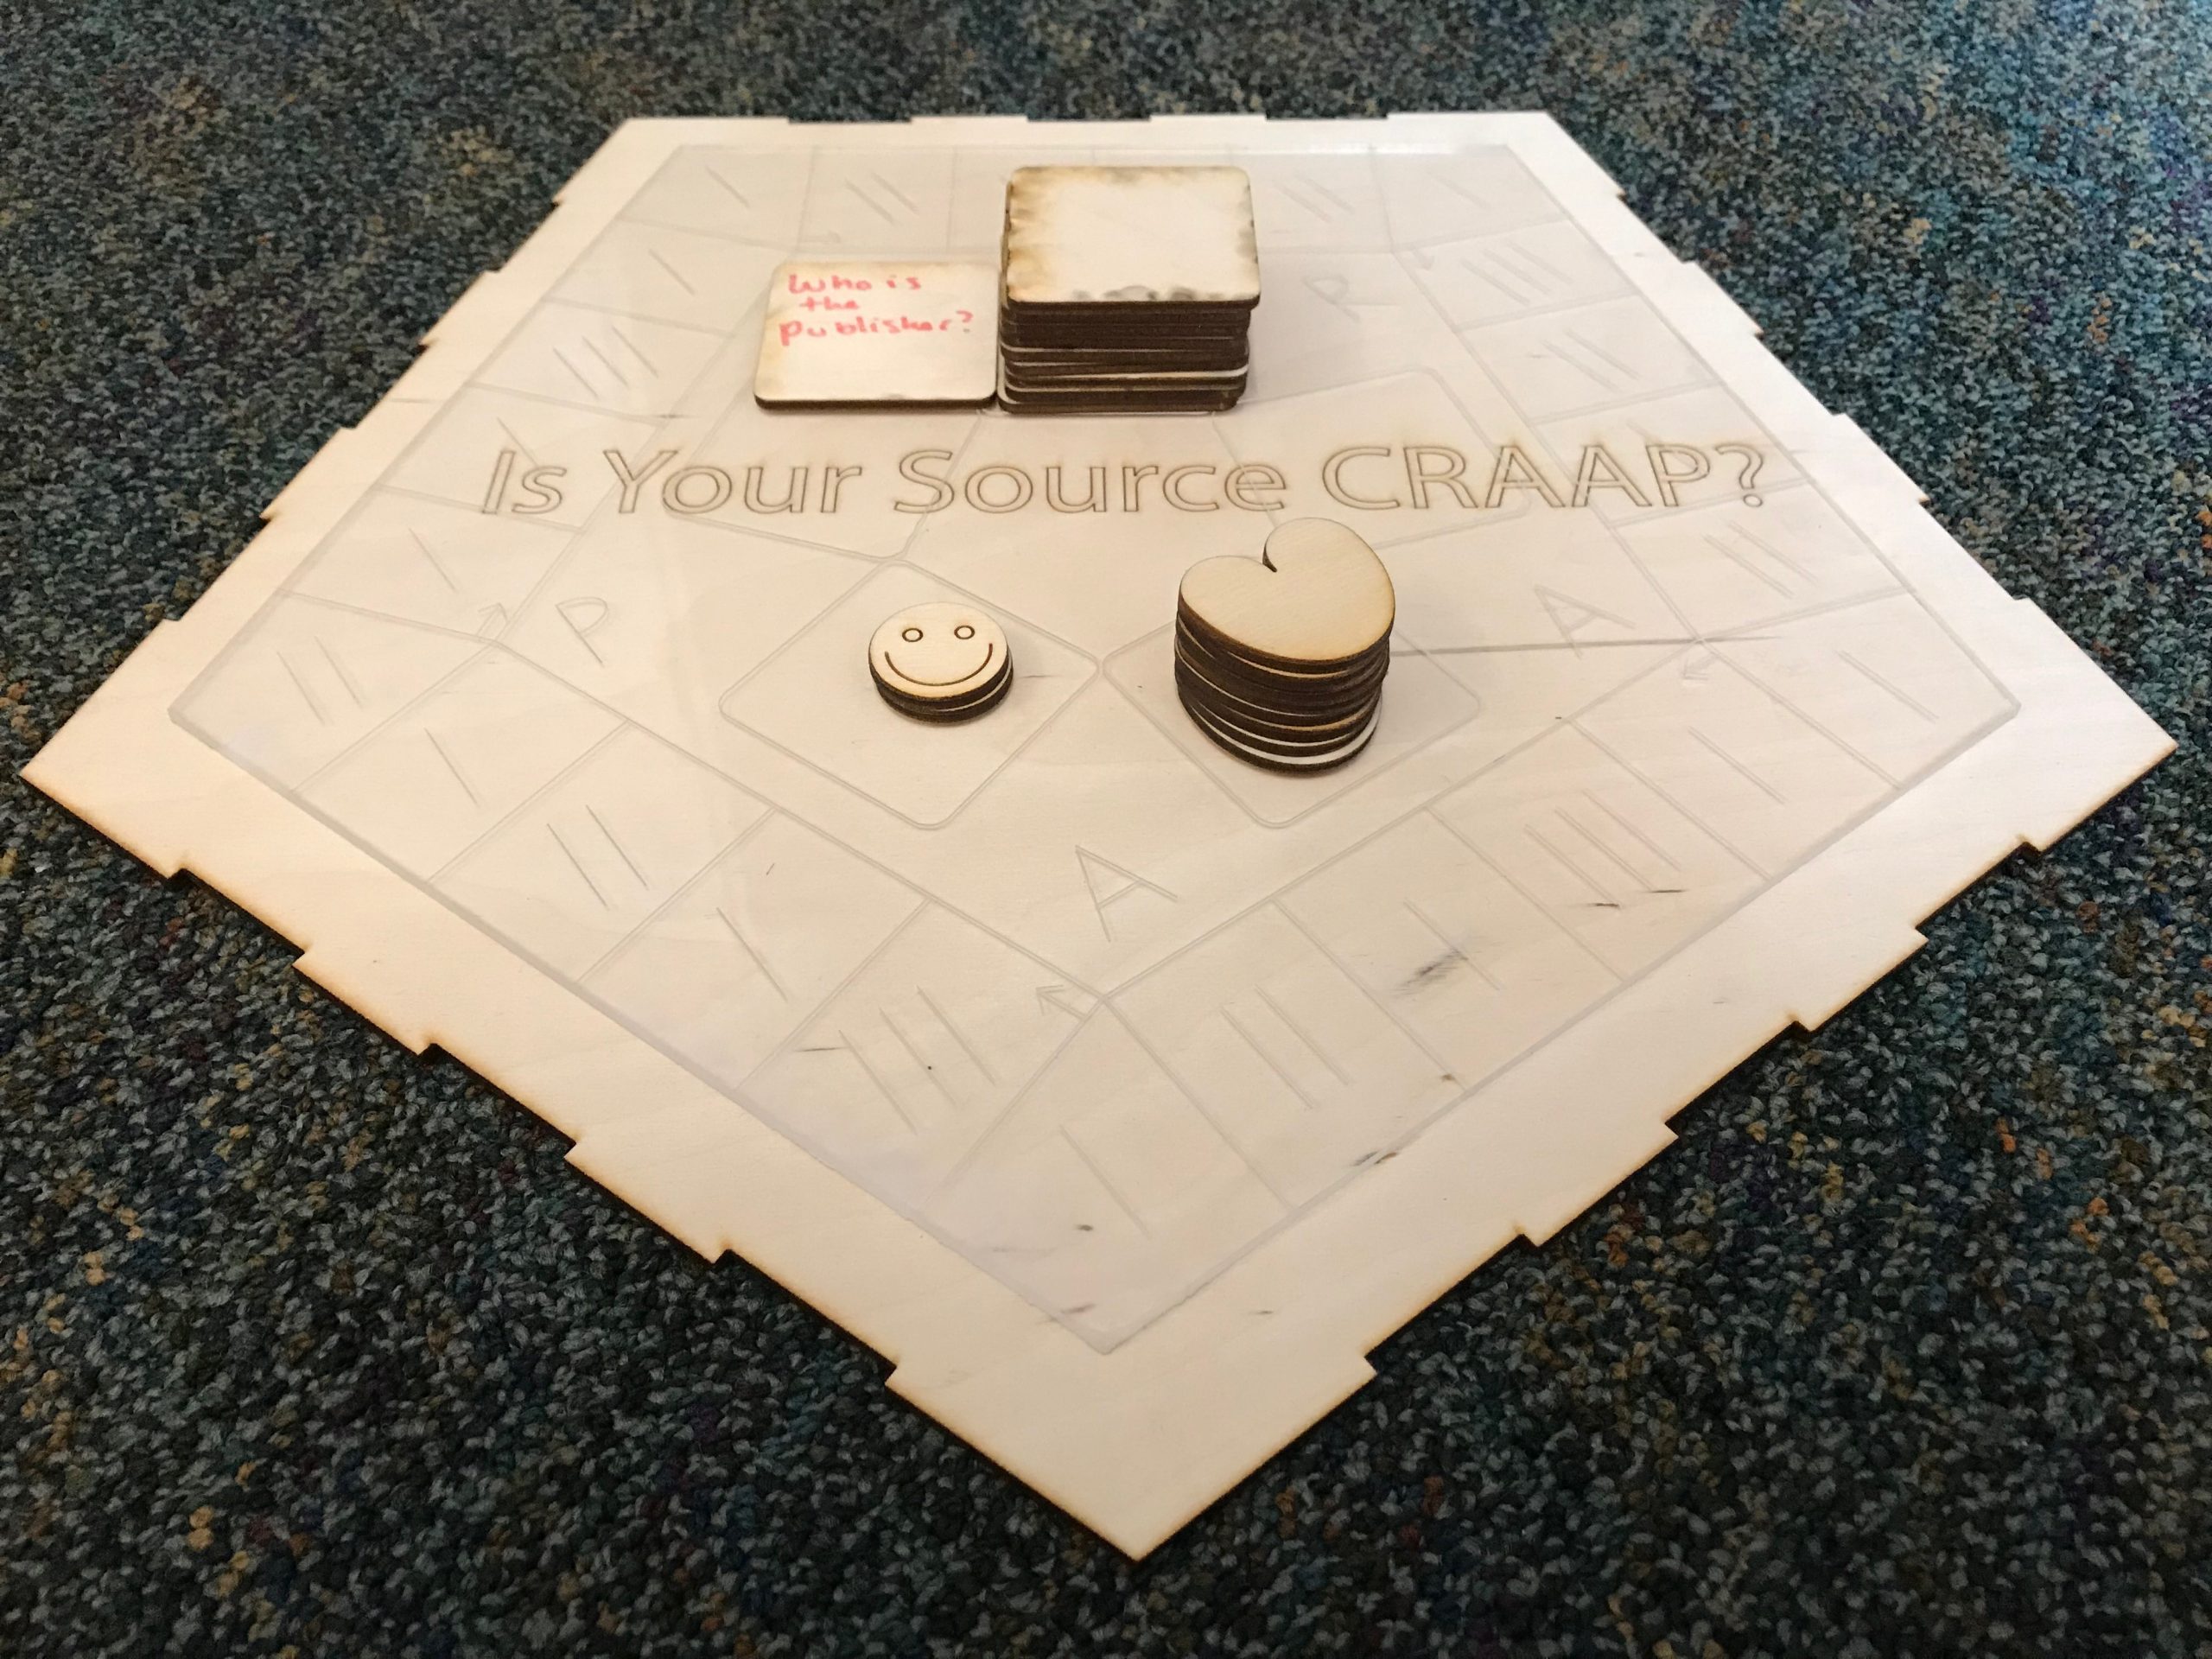 Freeman's students developed a CRAAP board game in the BeAM makerspace before spring break.